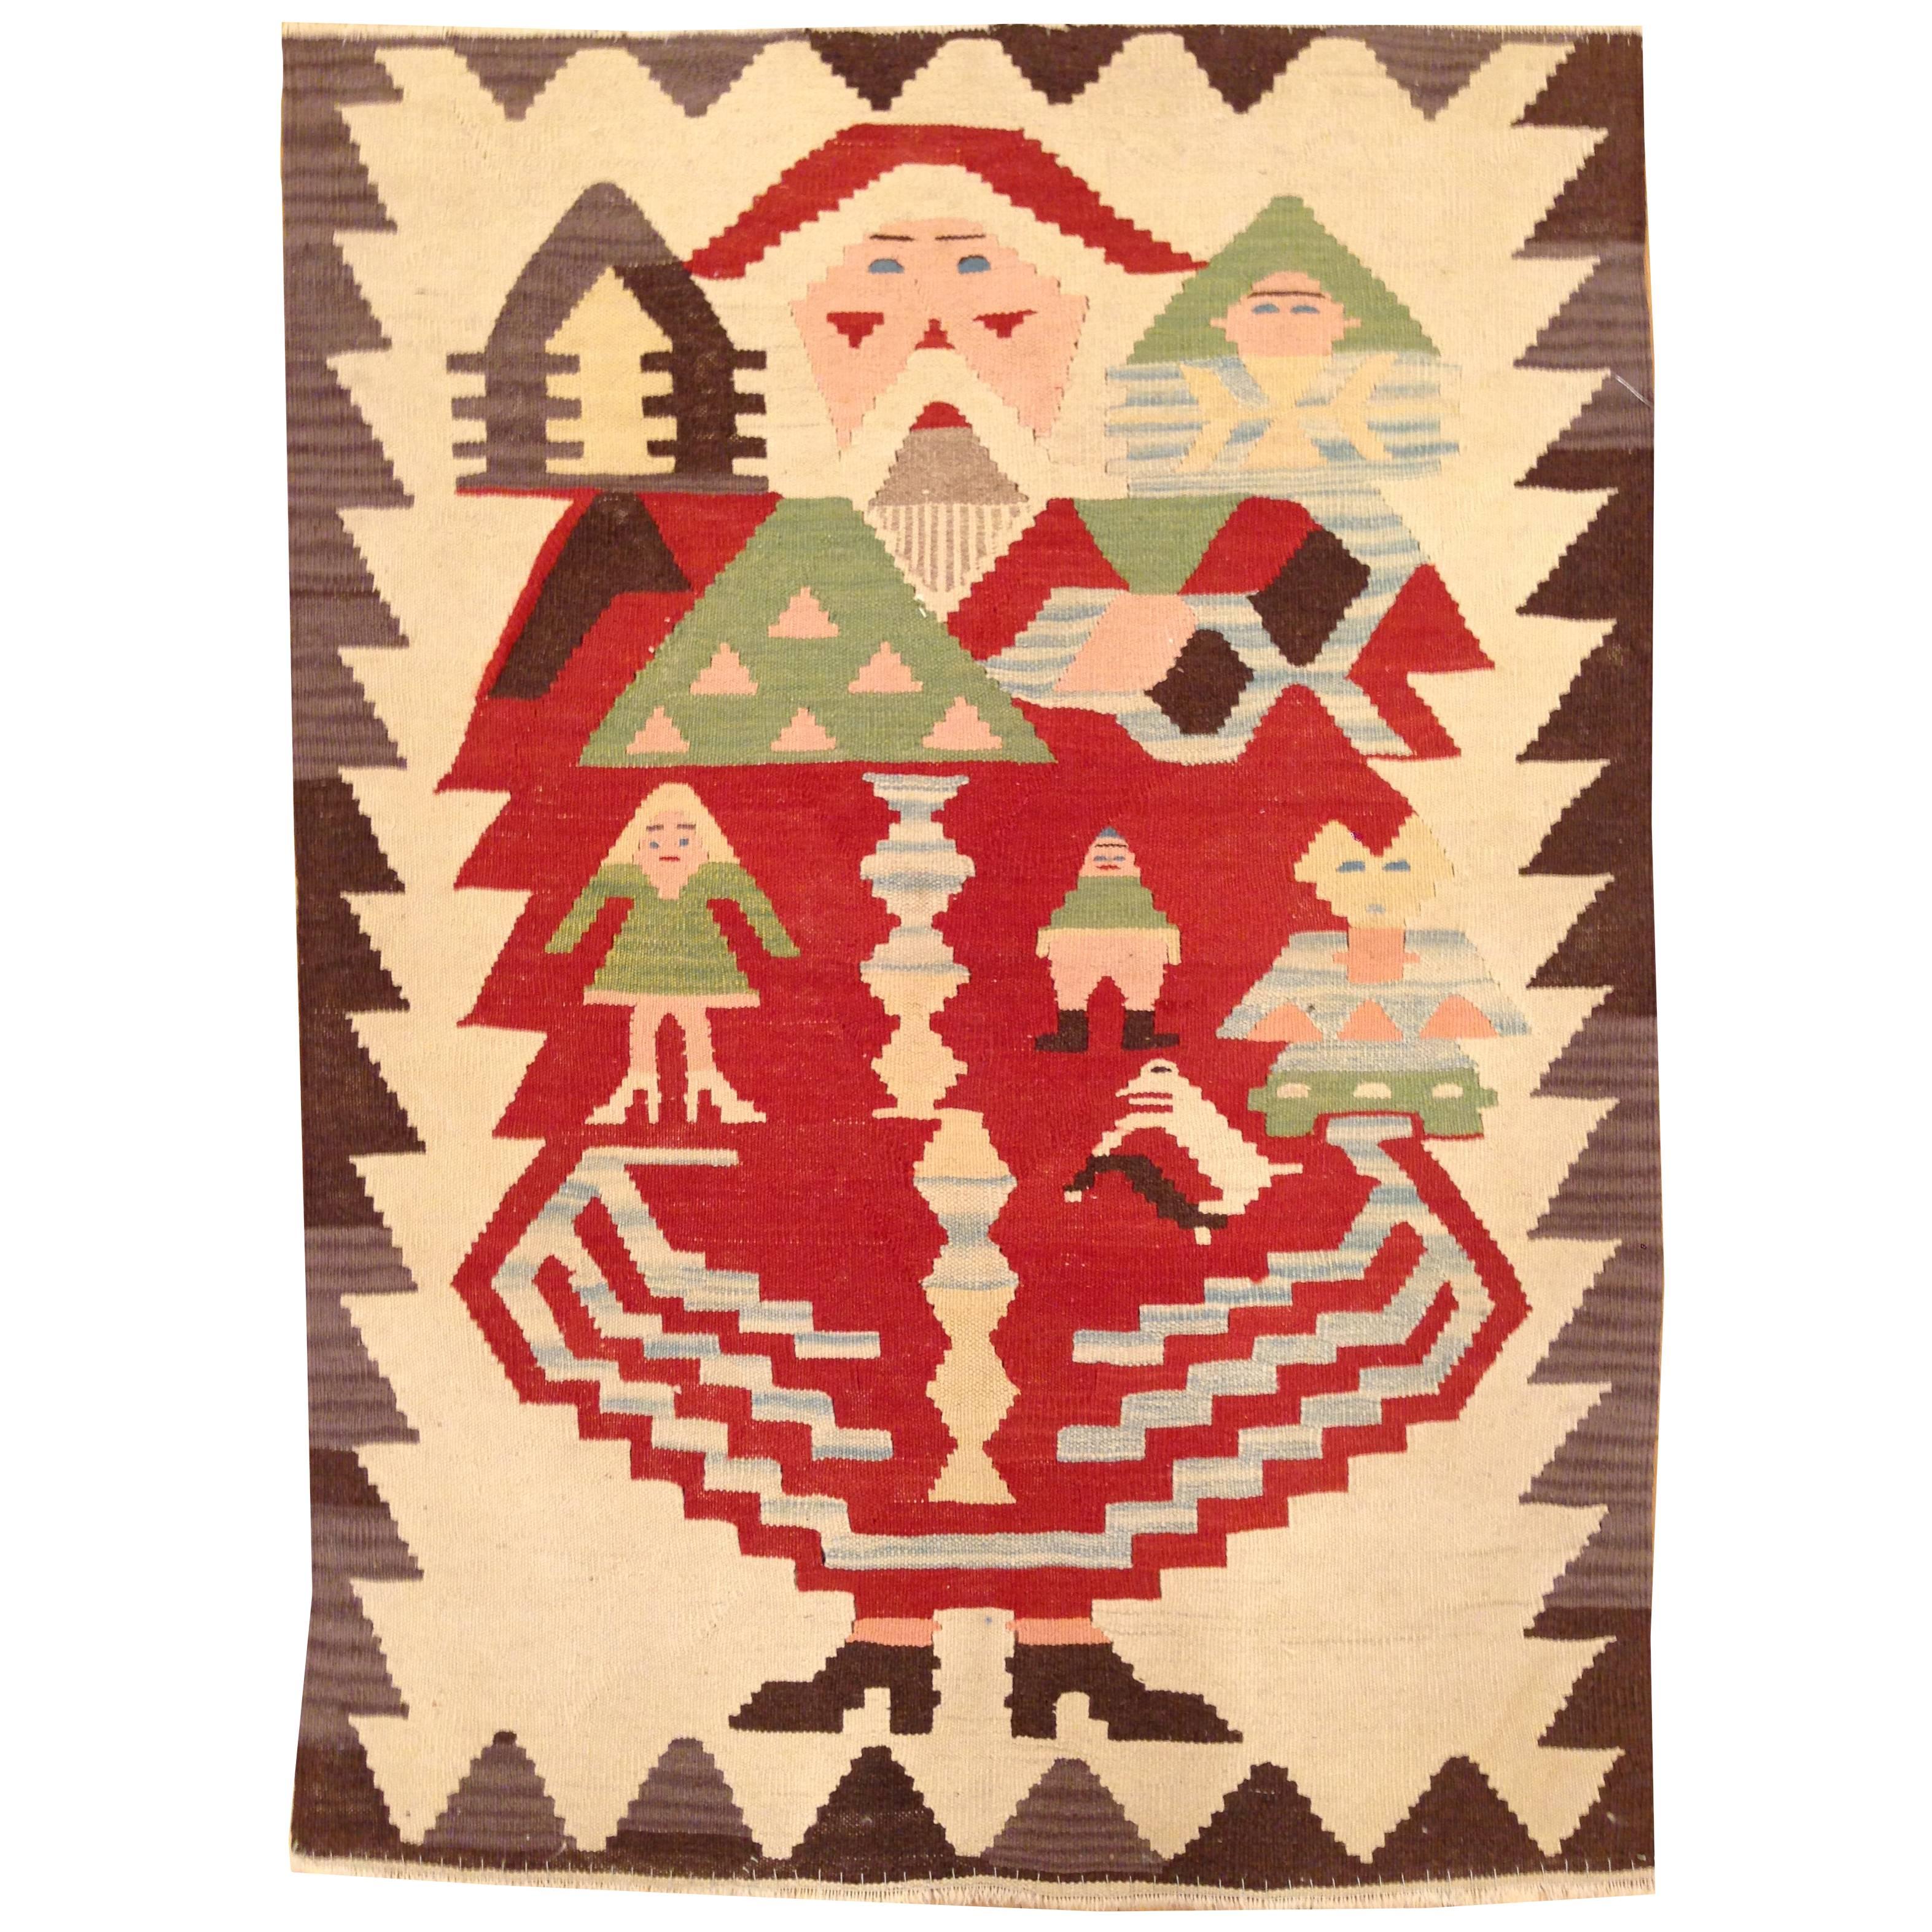 Vintage Turkish Flat-Woven Rug, in Small Size, w/ Baba Noel (Santa Claus) Design